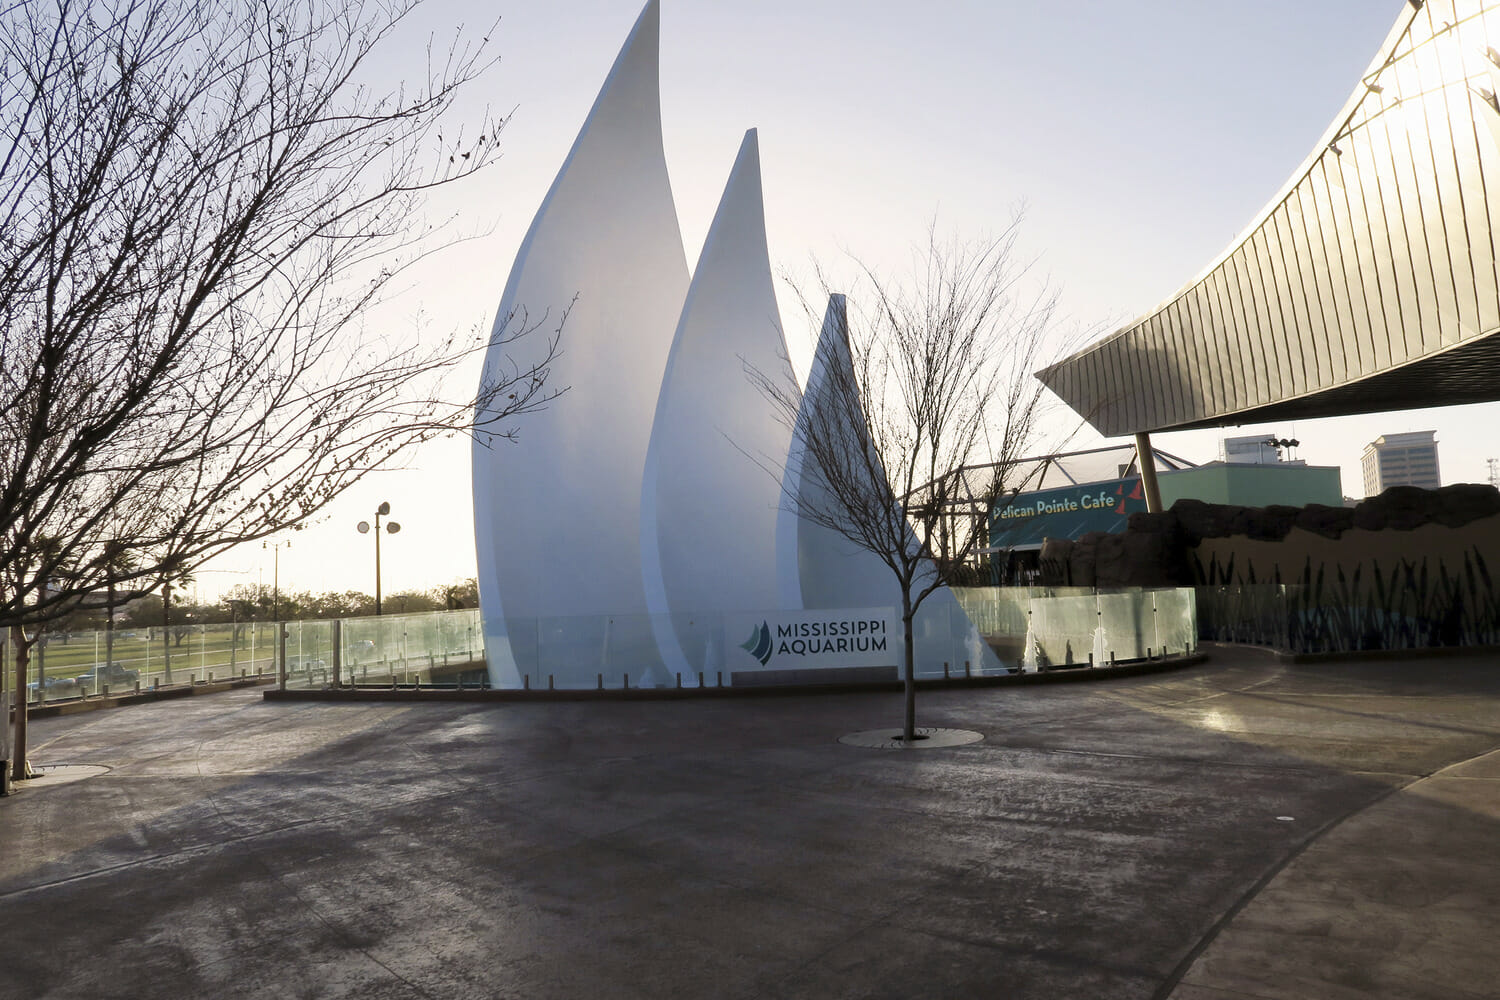 A large white sculpture in front of a building.